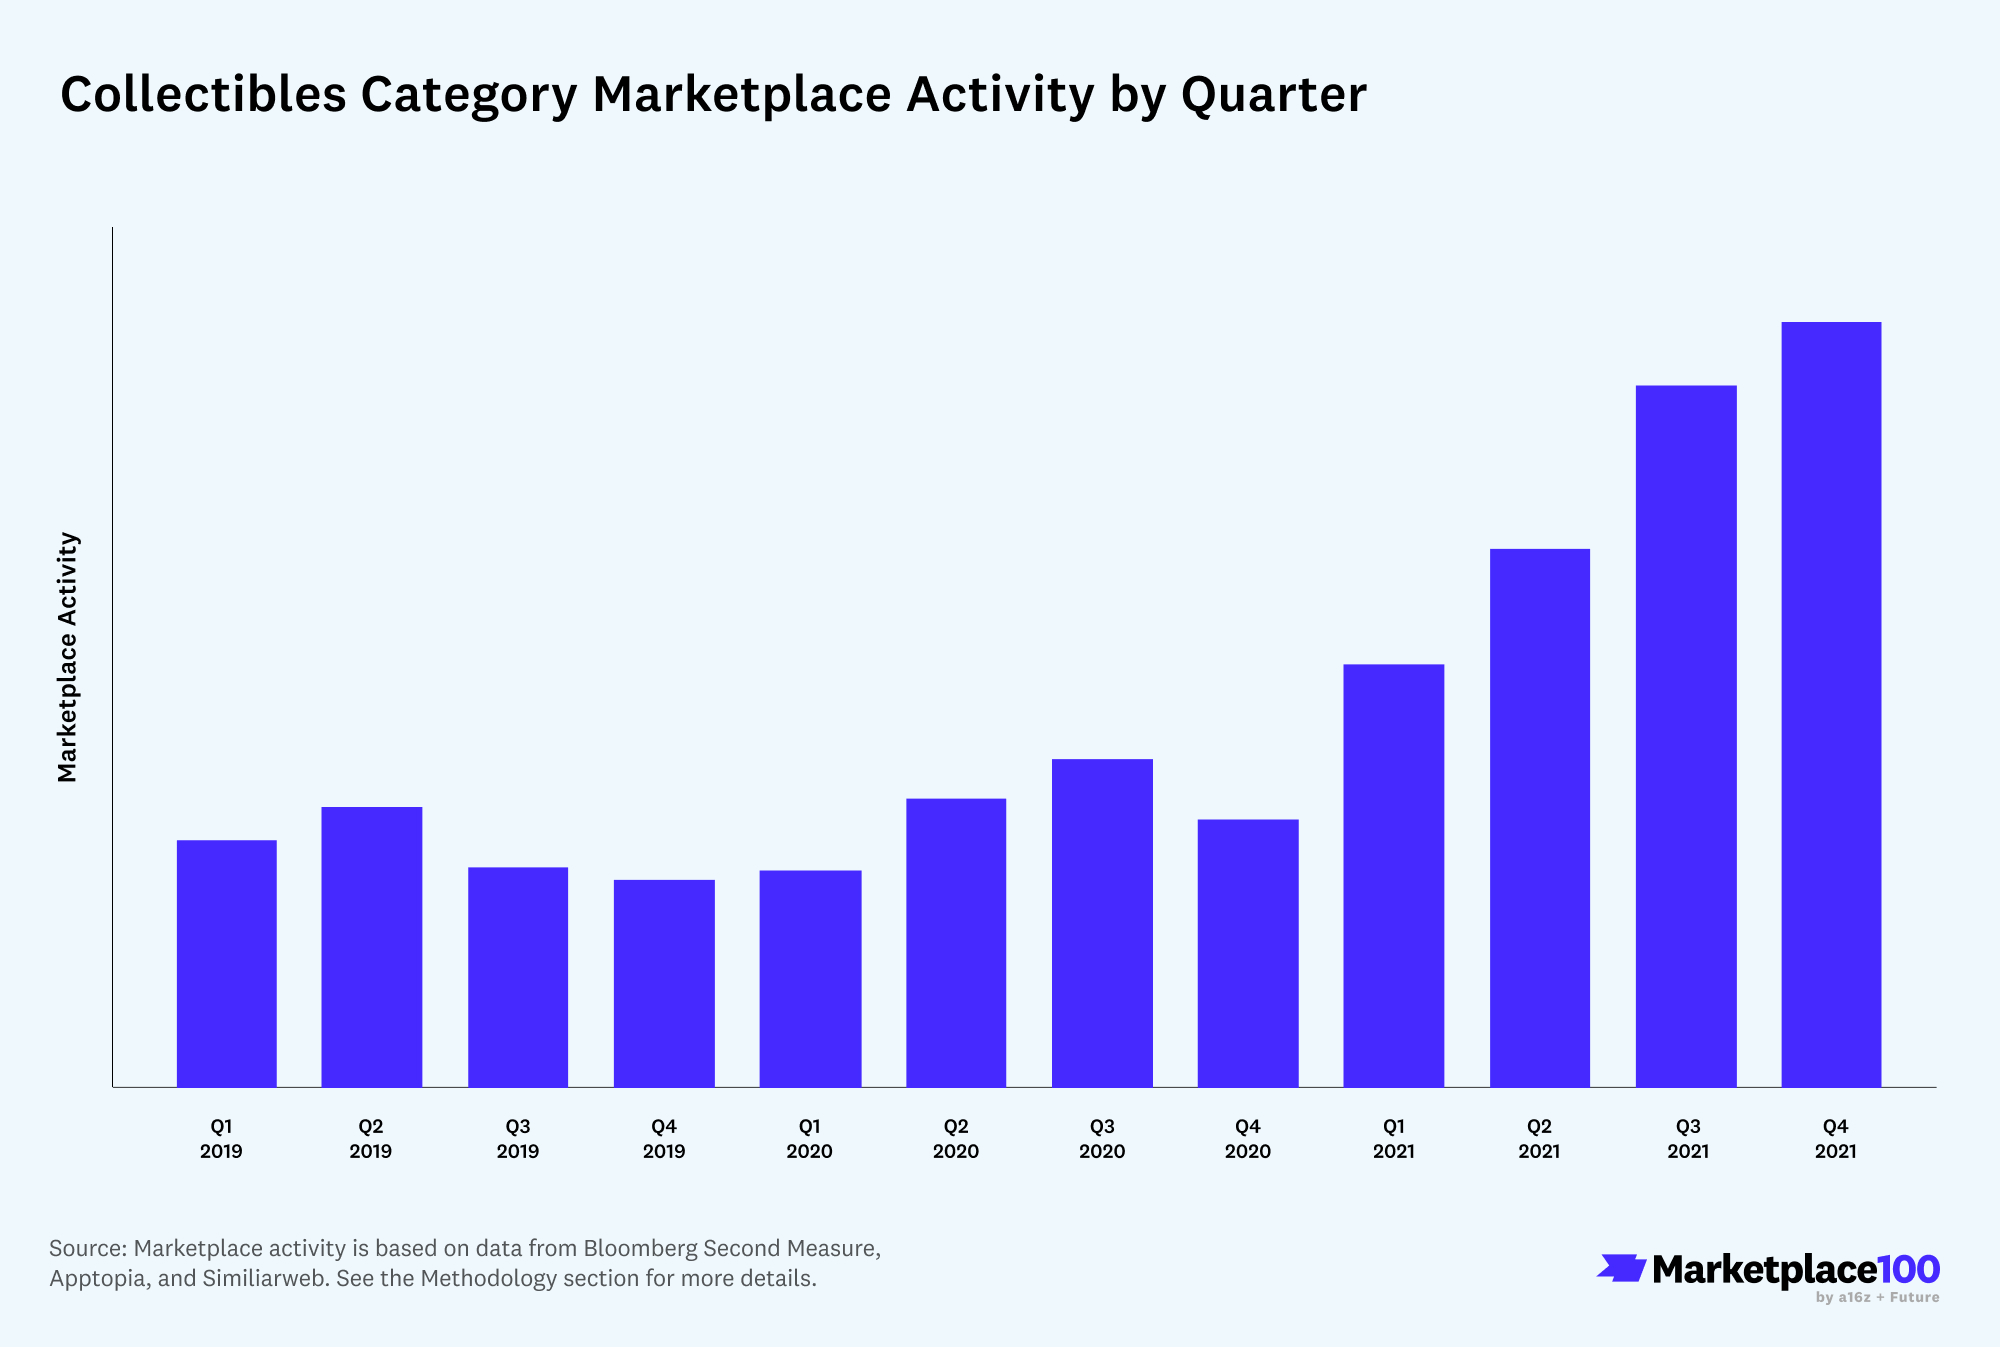 Marketplace 100: Collectibles Category Marketplace Activity by Quarter